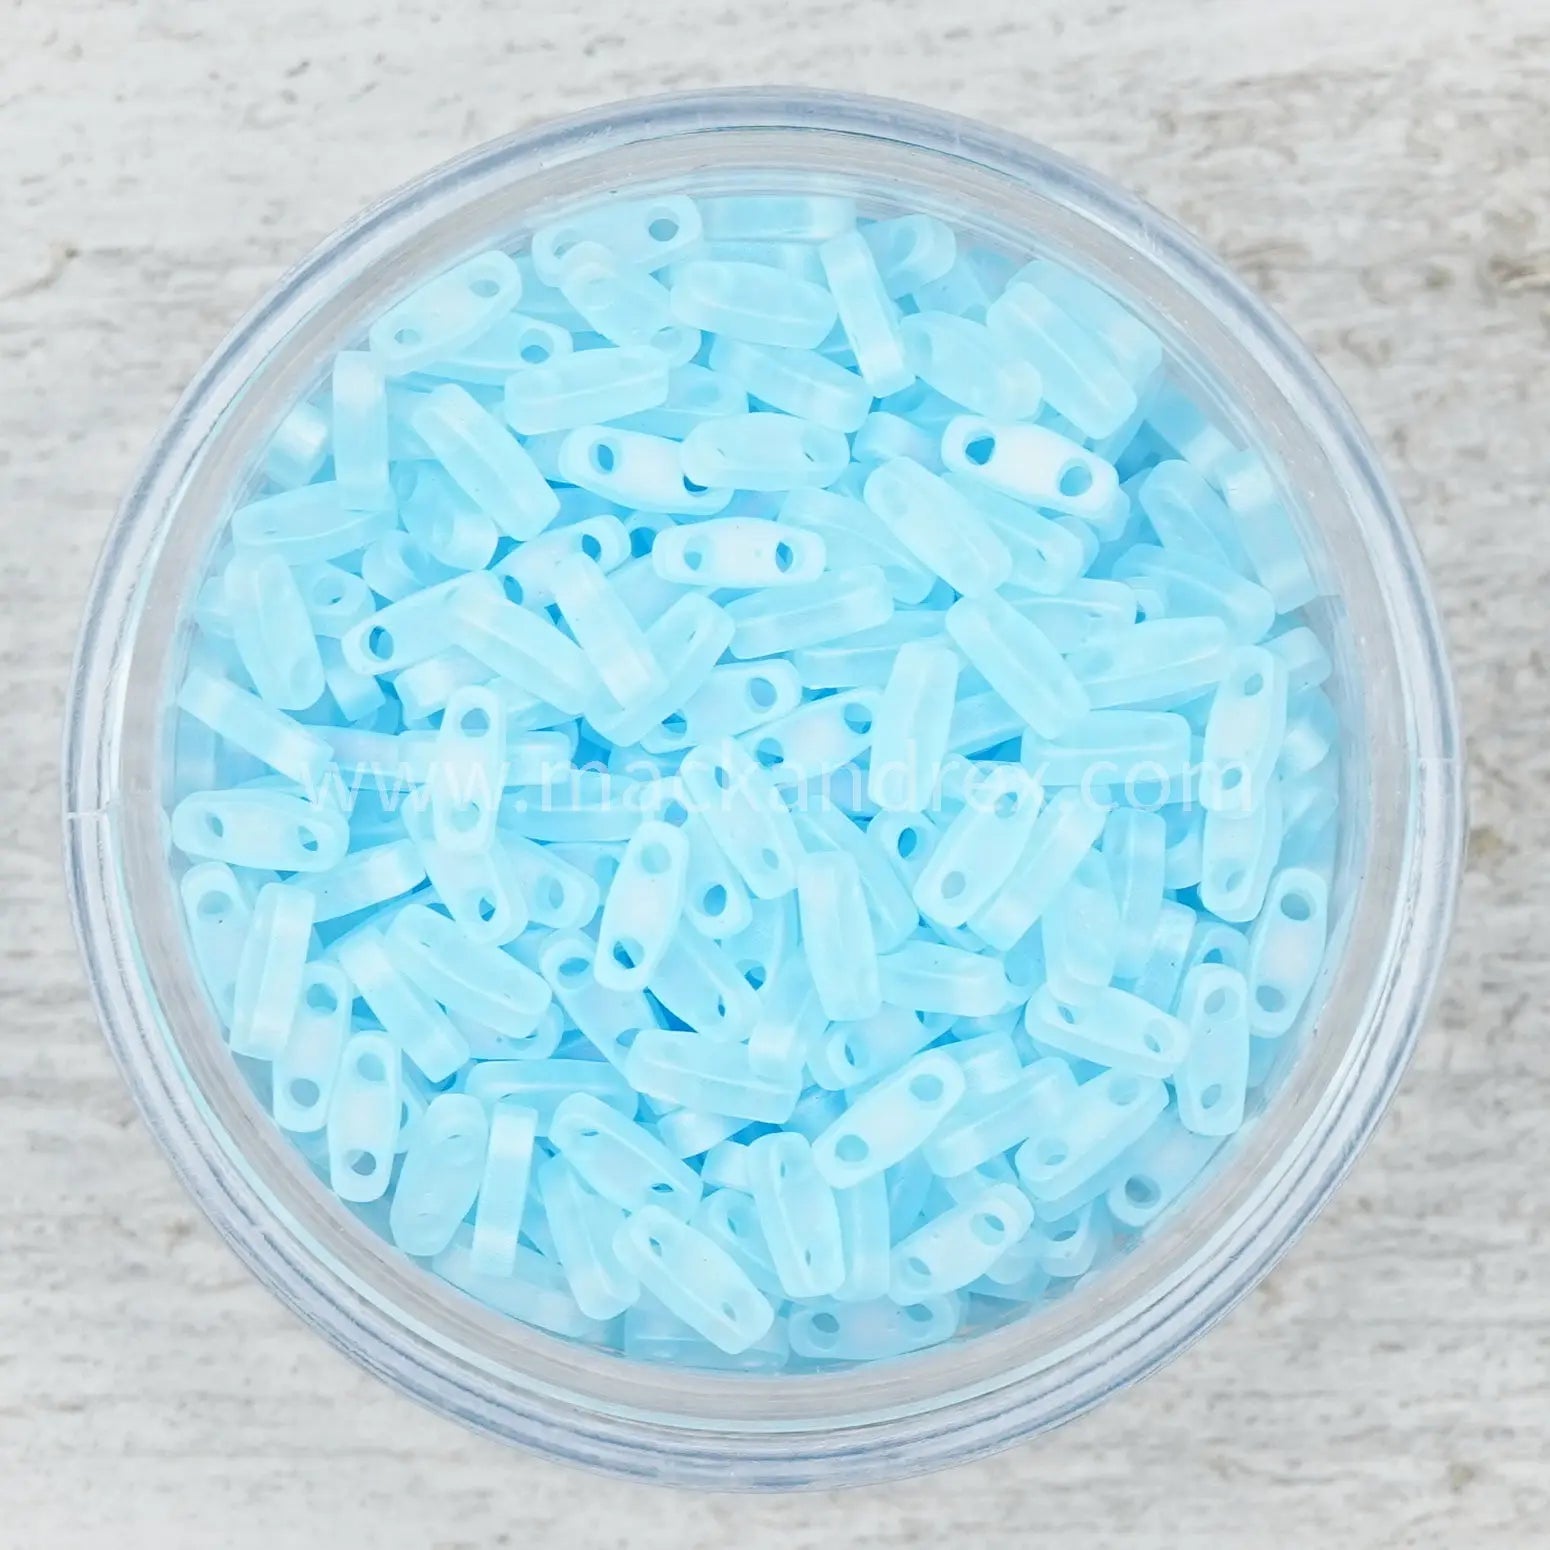 a bowl filled with blue plastic beads on top of a wooden table